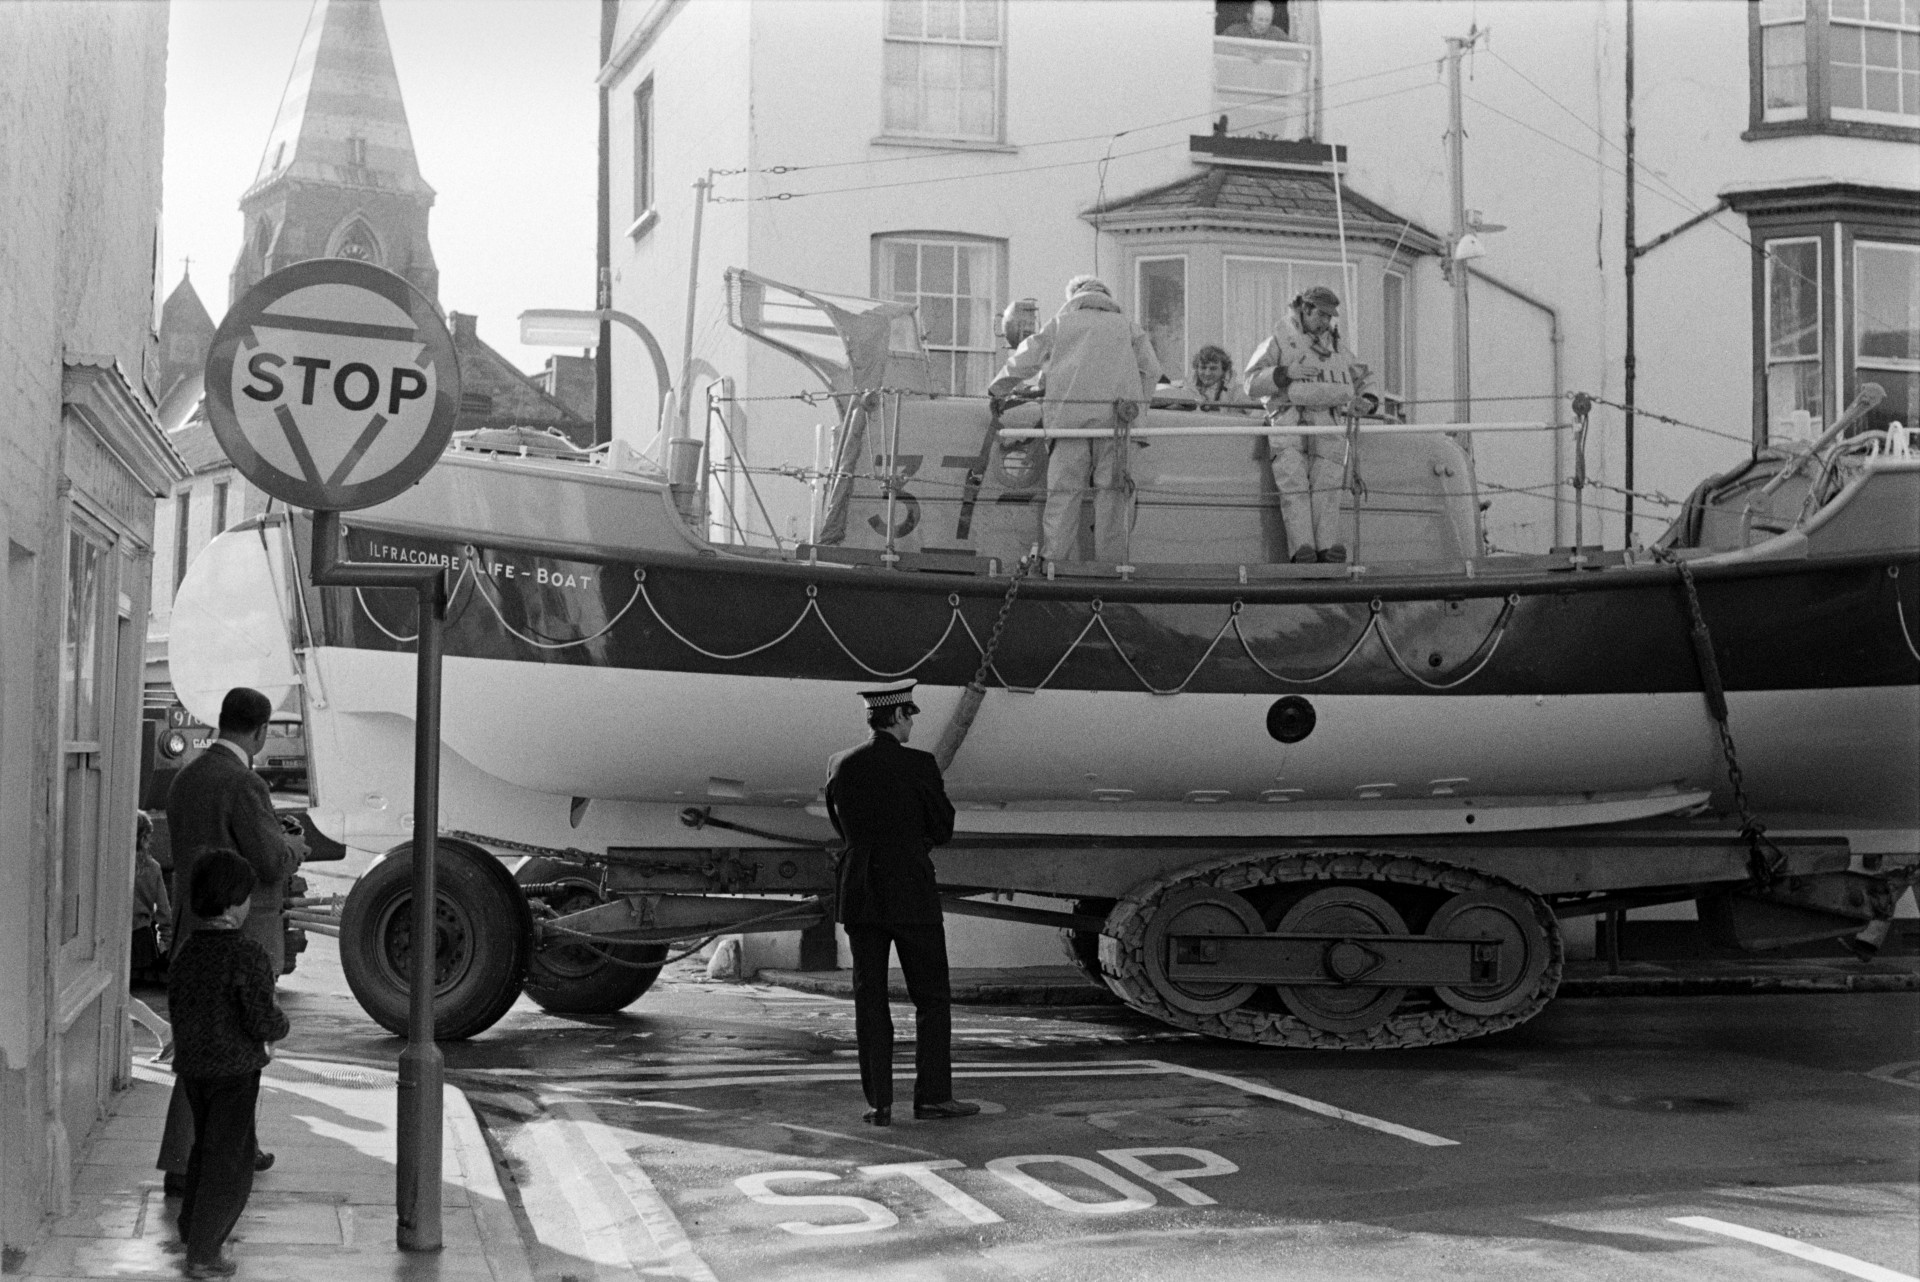 A life boat being transported through Ilfracombe to the harbour on a vehicle with caterpillar tracks. The crew are on the boat and people are watching it from the streets. A policeman is stood at a road junction while the boat moves past.